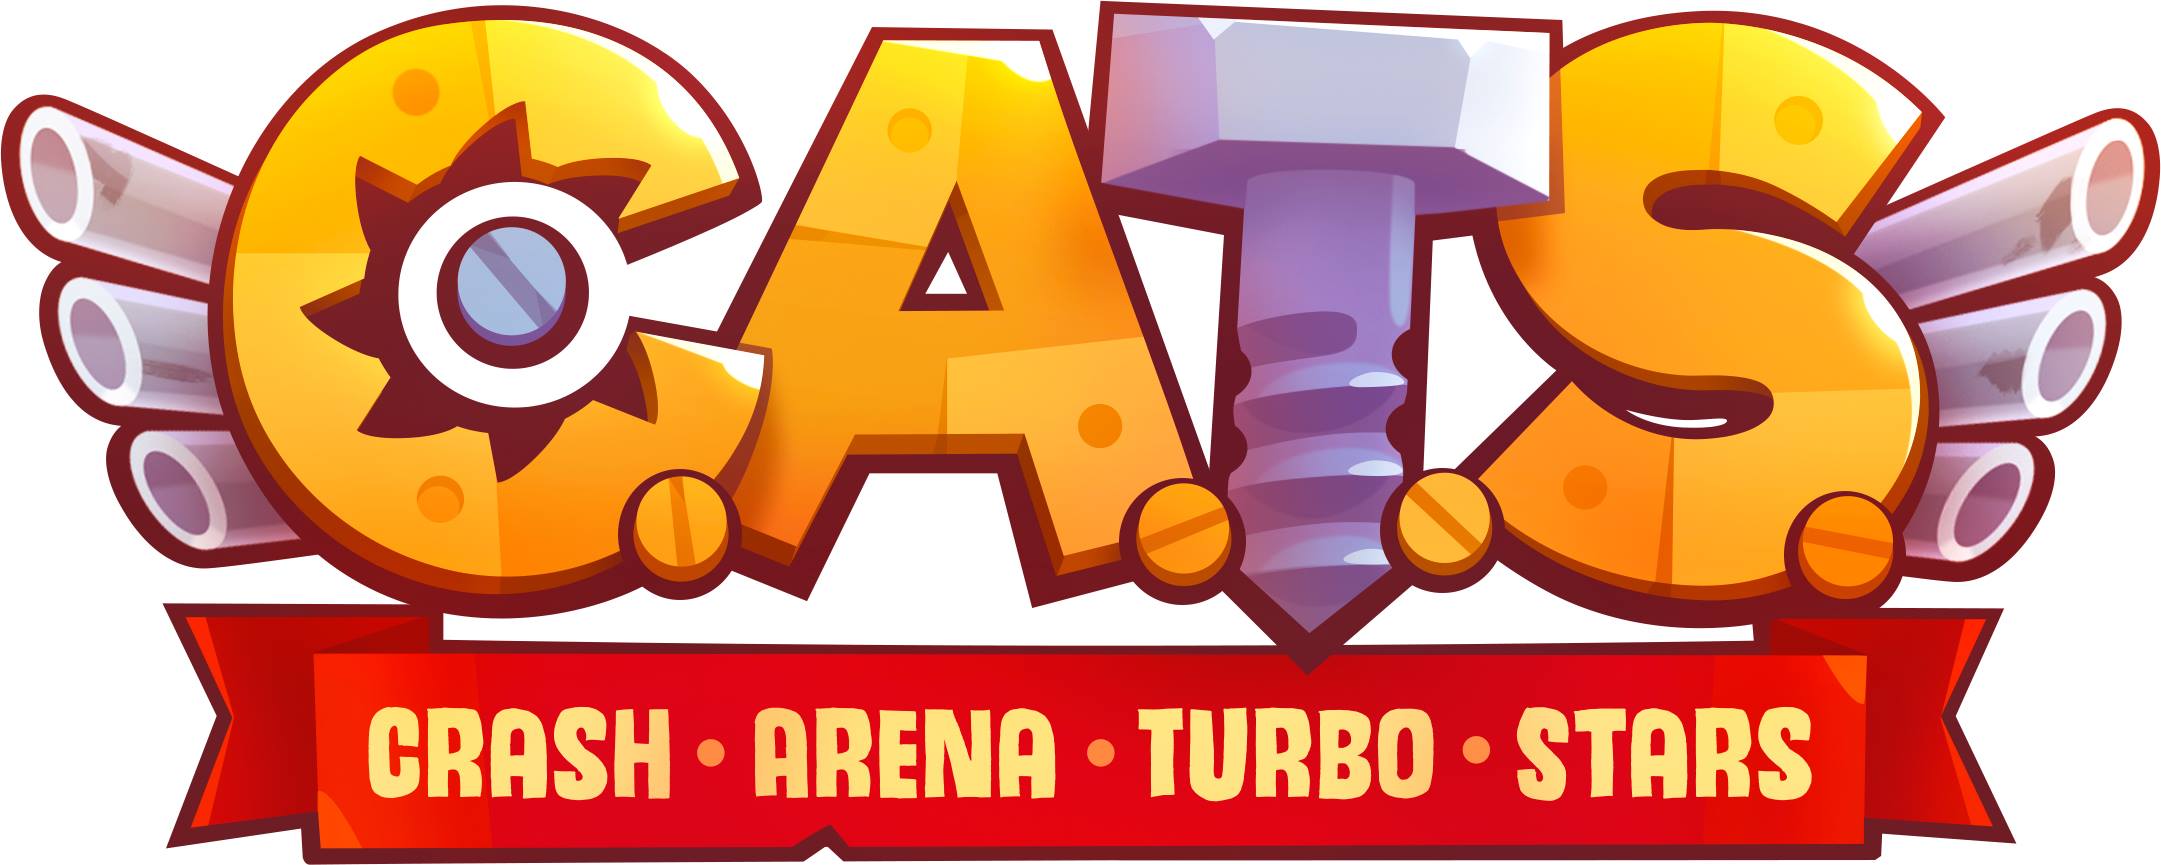 cats crash arena turbo stars game guide unofficial